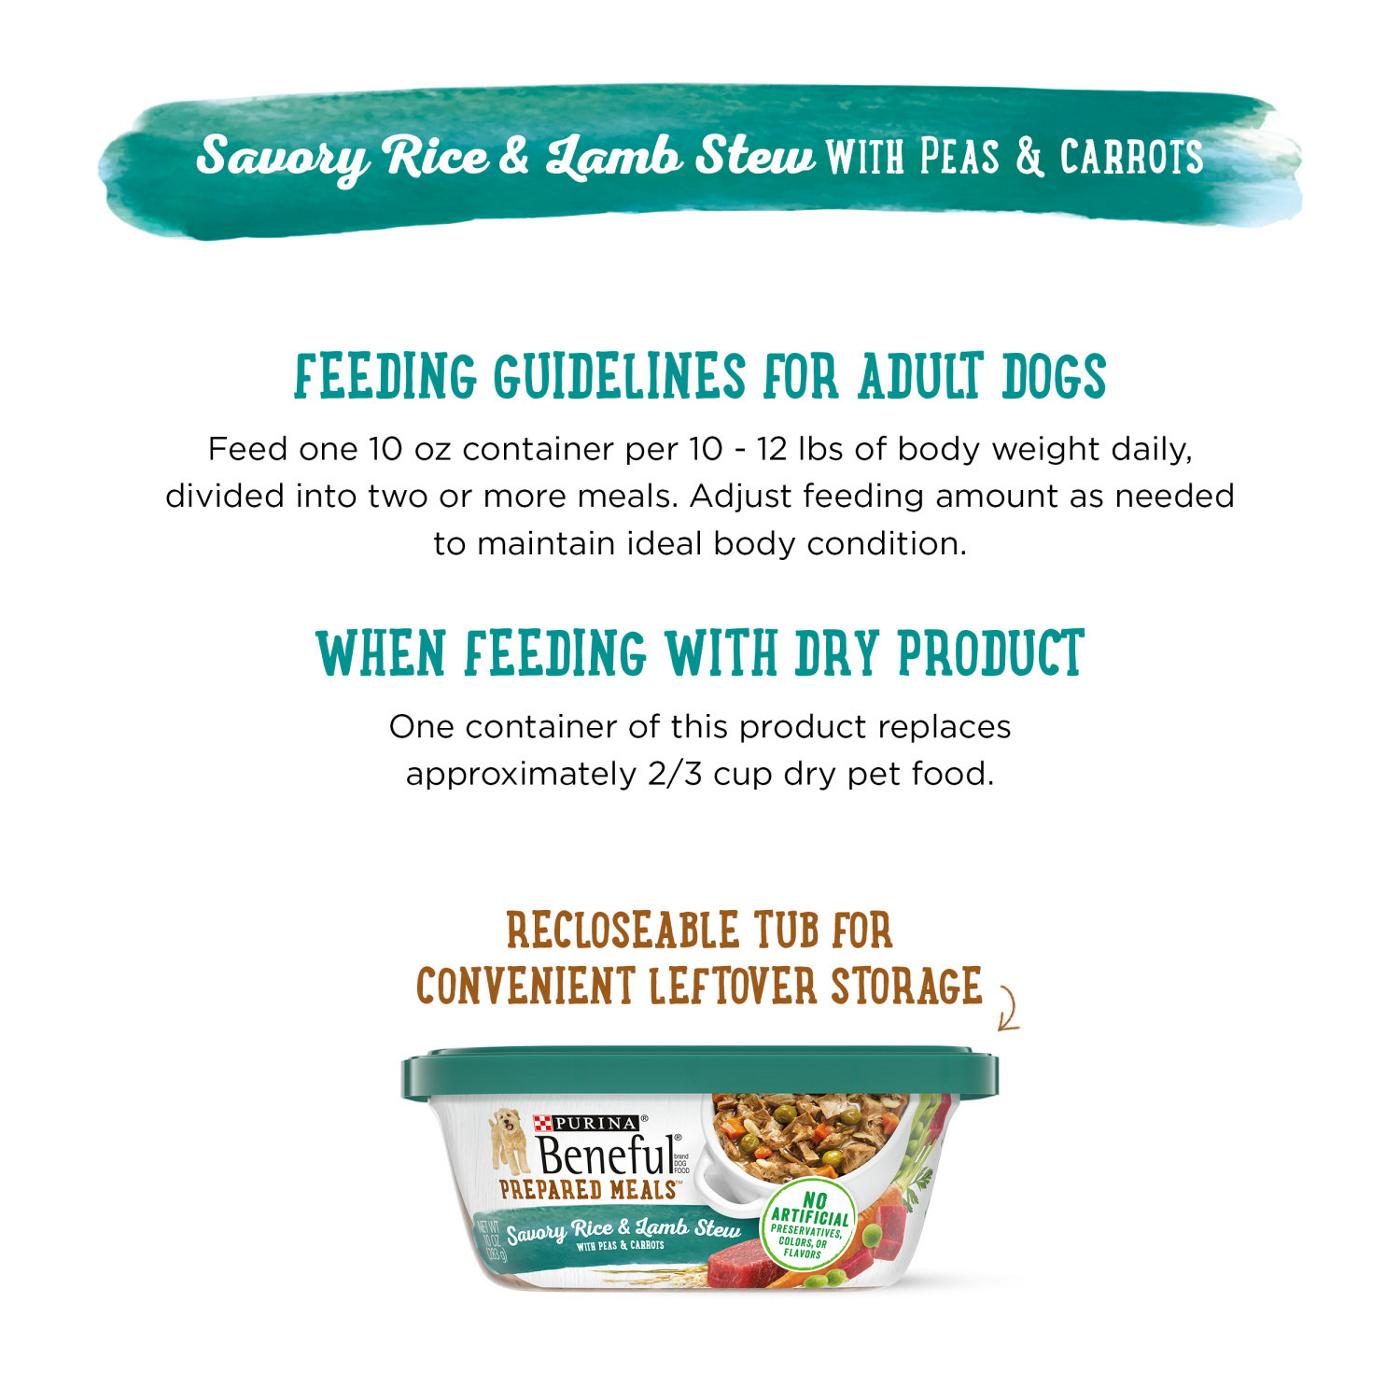 Beneful Purina Beneful High Protein Wet Dog Food With Gravy, Prepared Meals Savory Rice & Lamb Stew; image 7 of 8